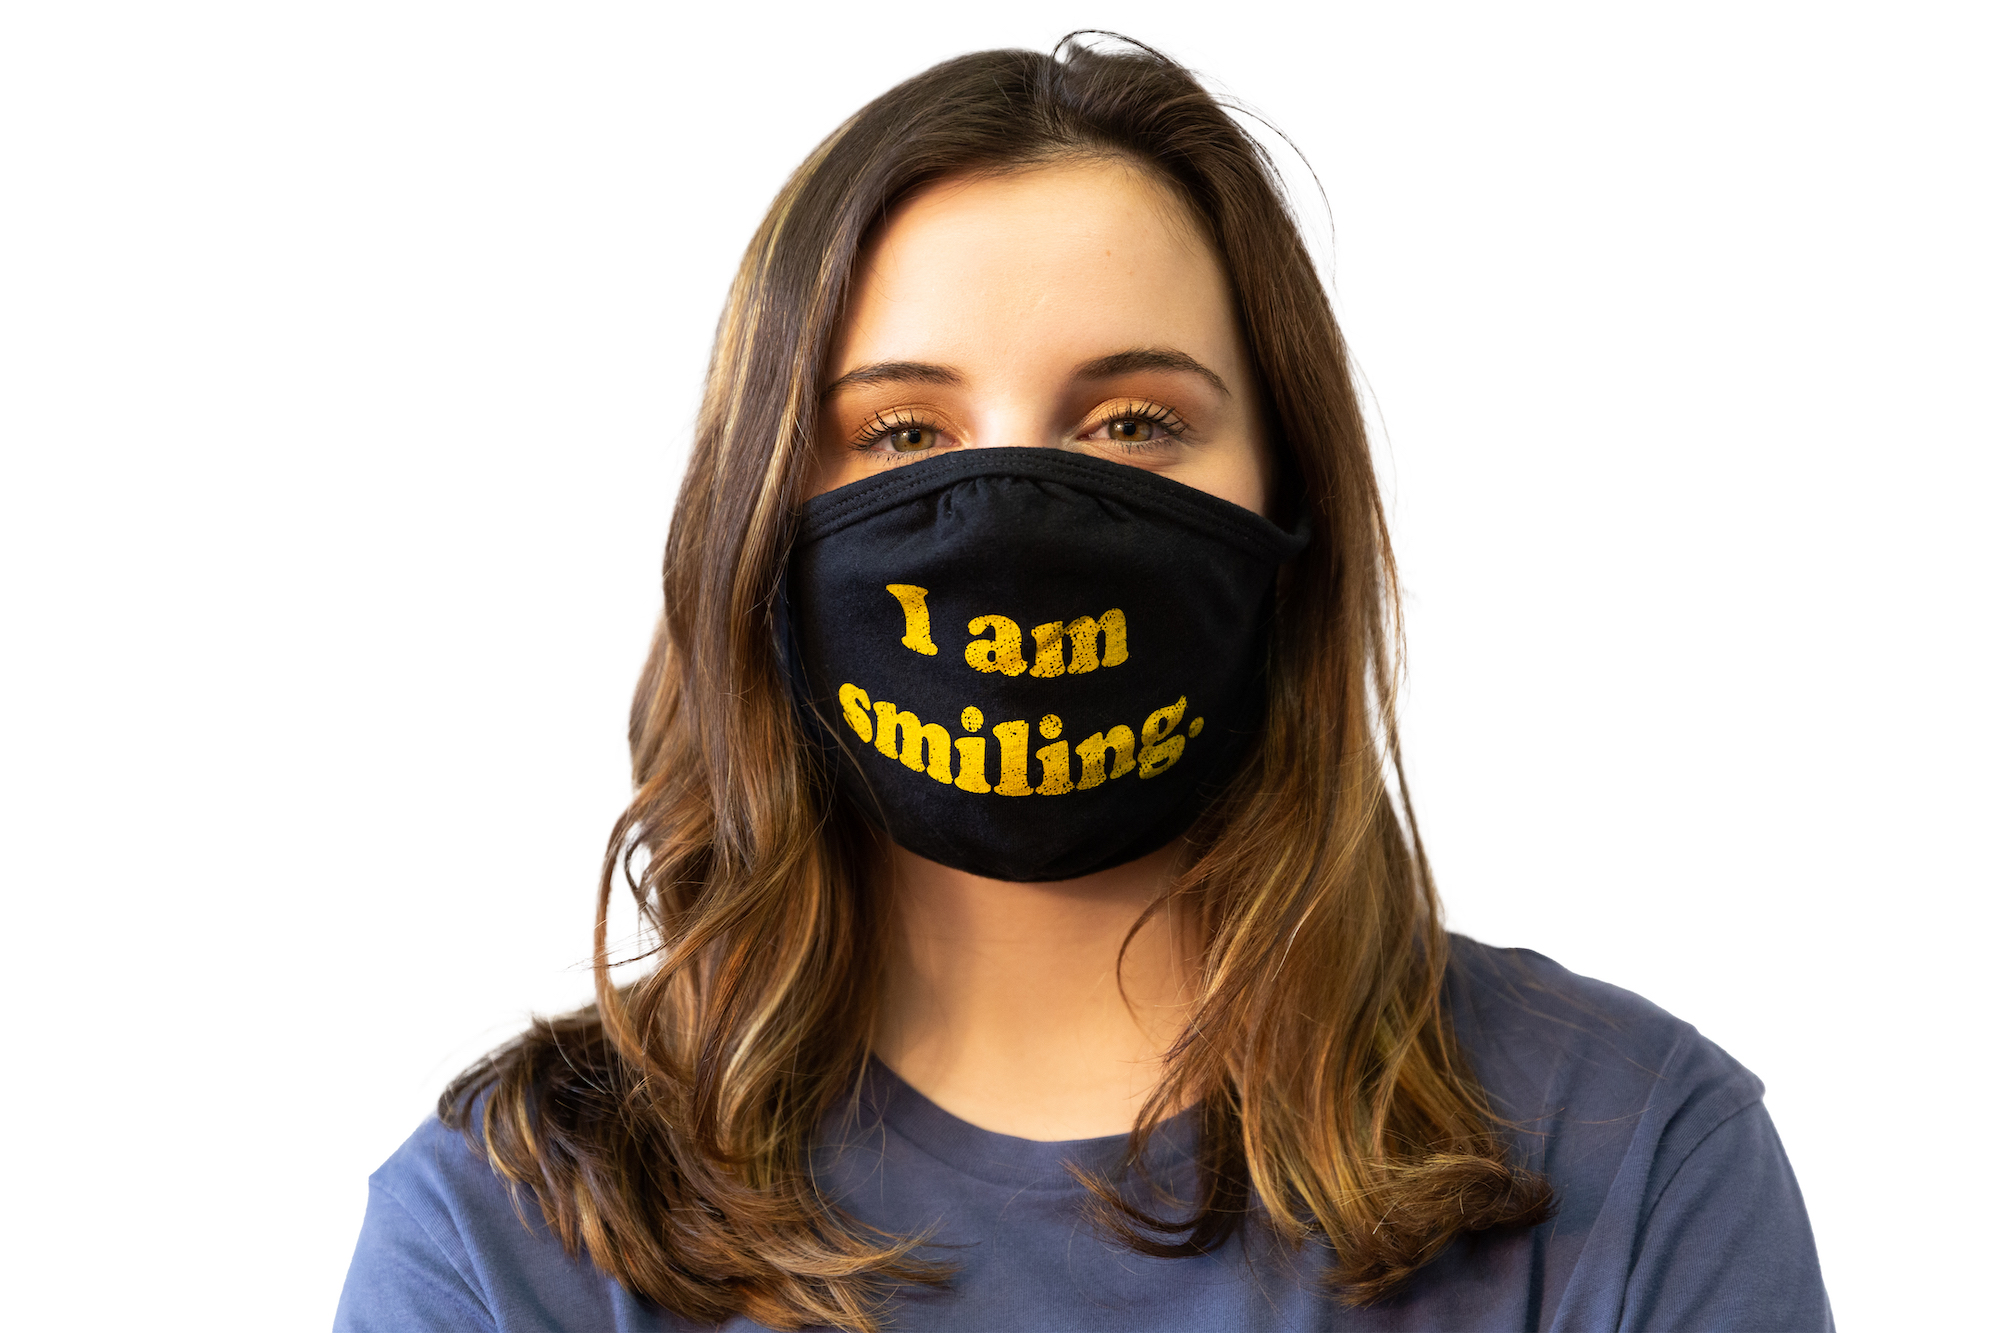 I Am Smiling Face Mask Funny Happy Face Novelty Graphic Nose And Mouth Covering - image 3 of 8